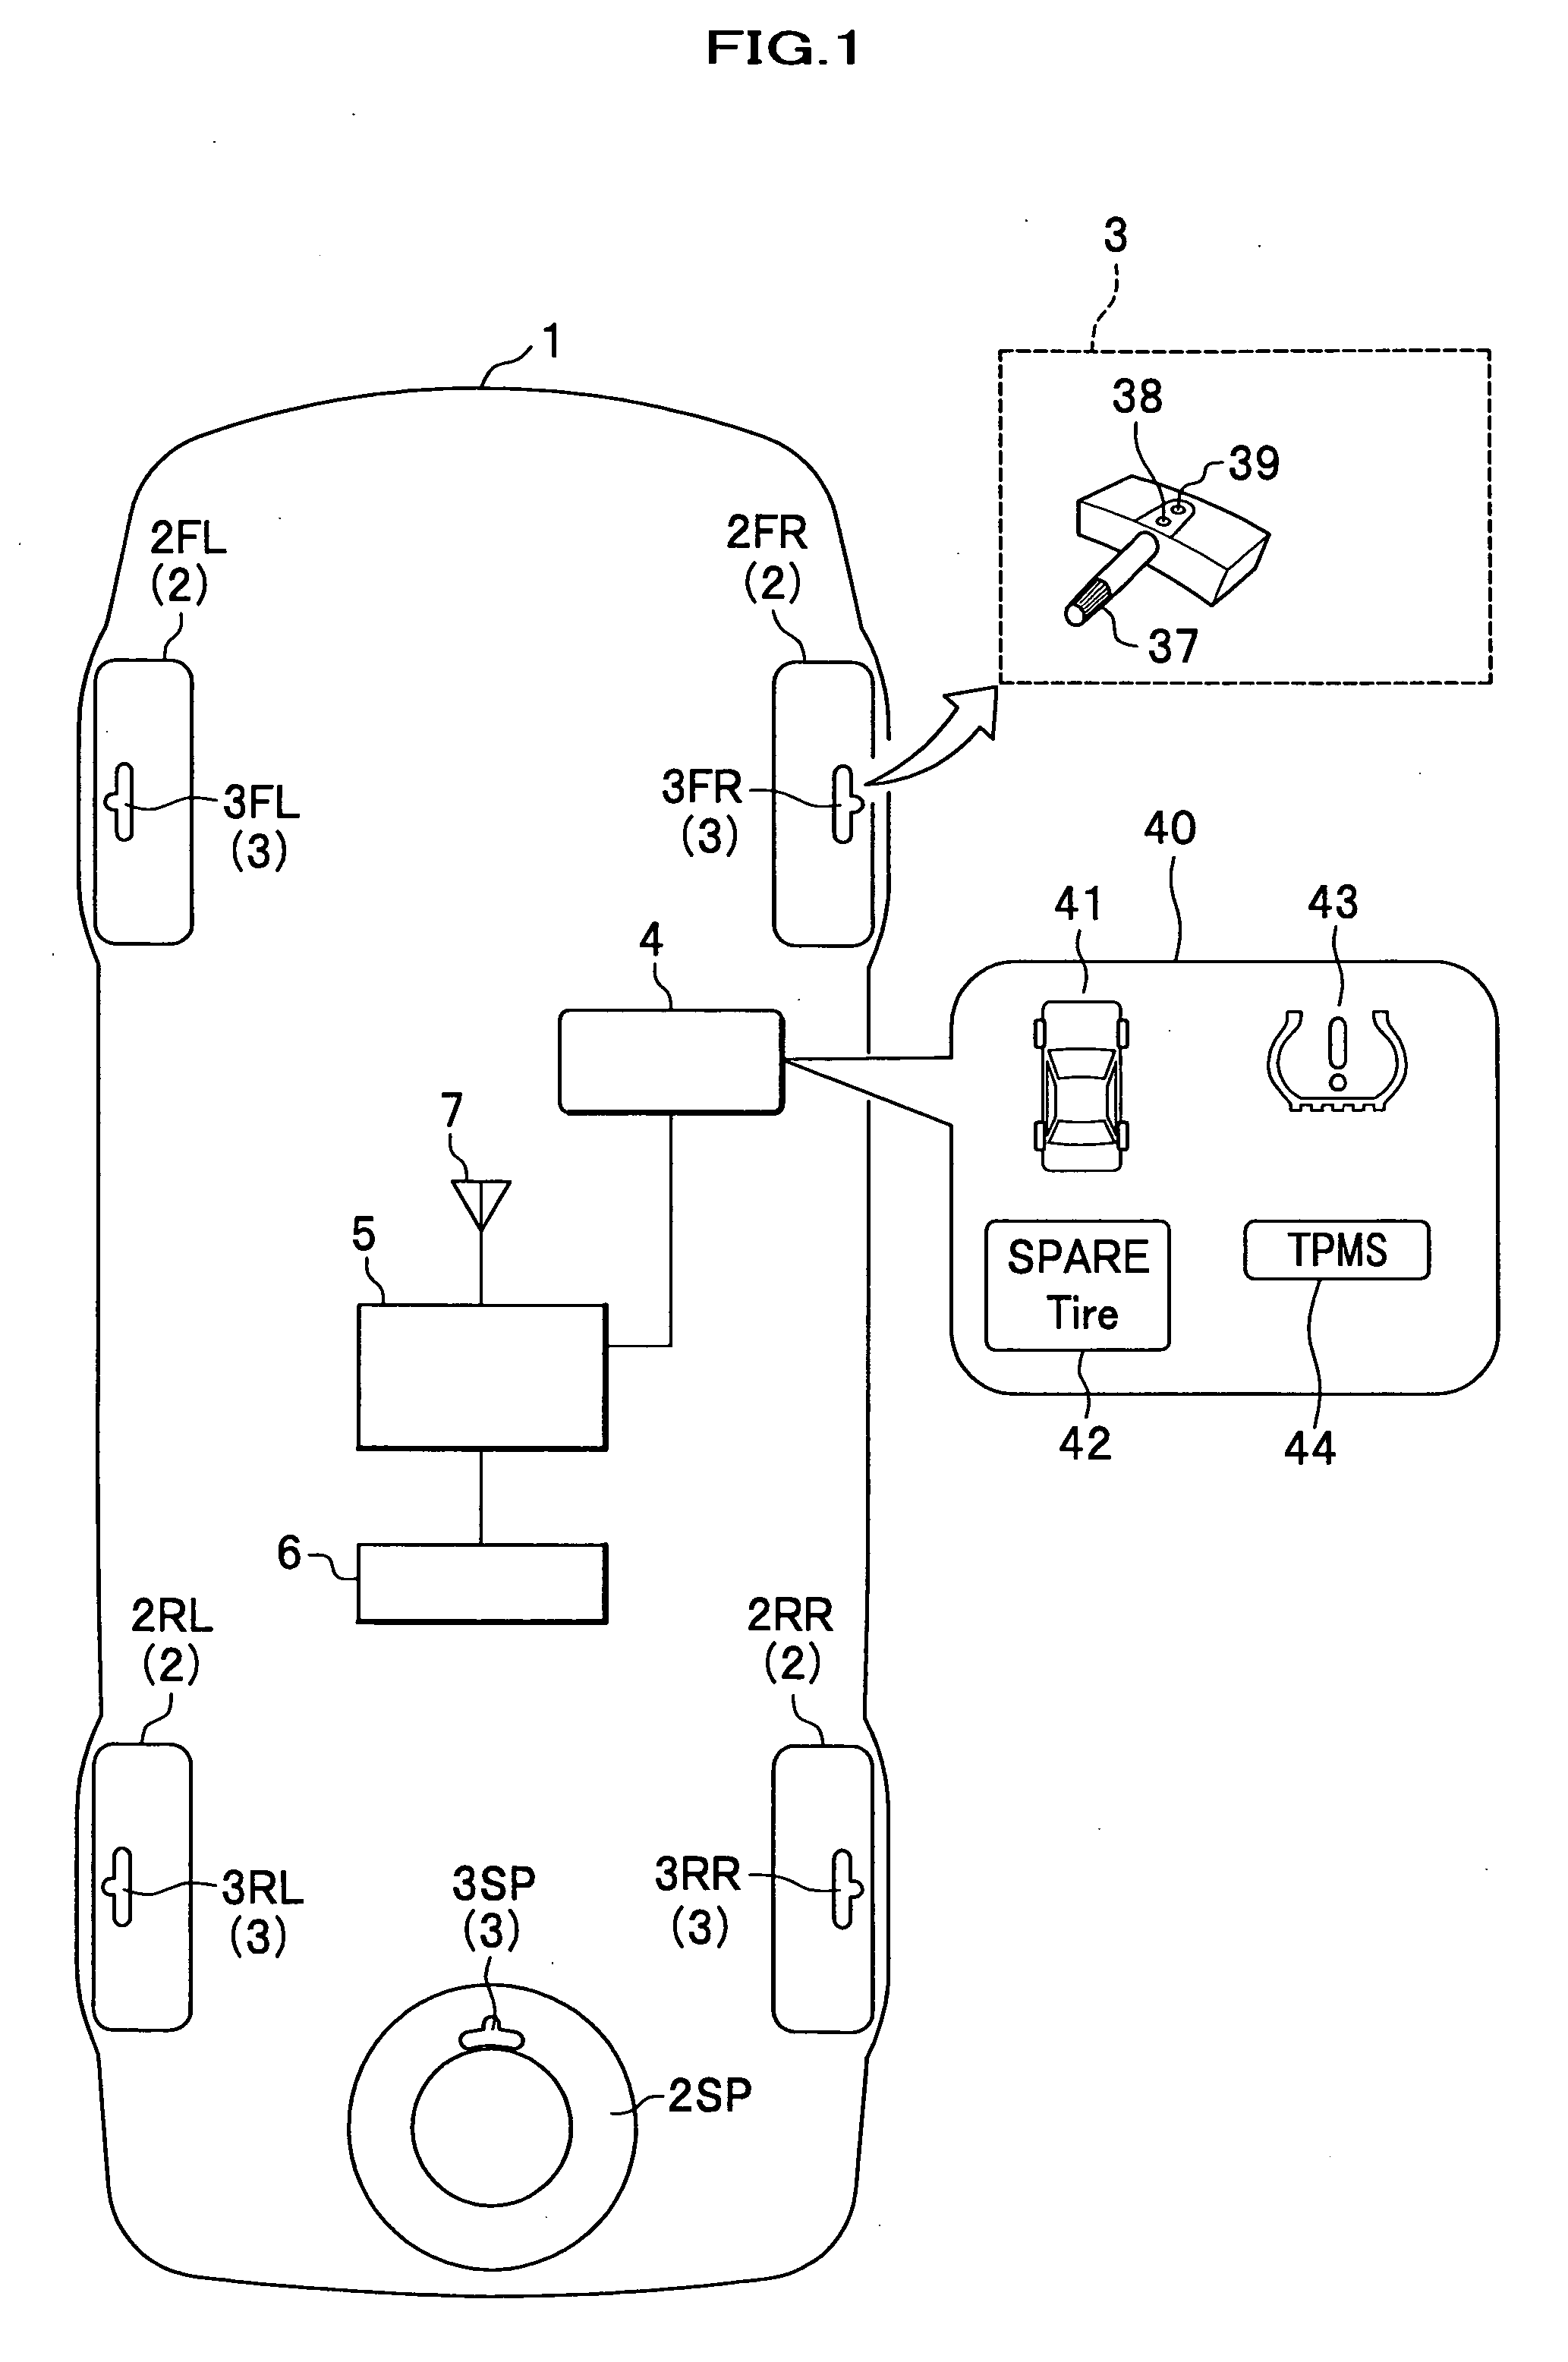 System and method for monitoring tire pressure